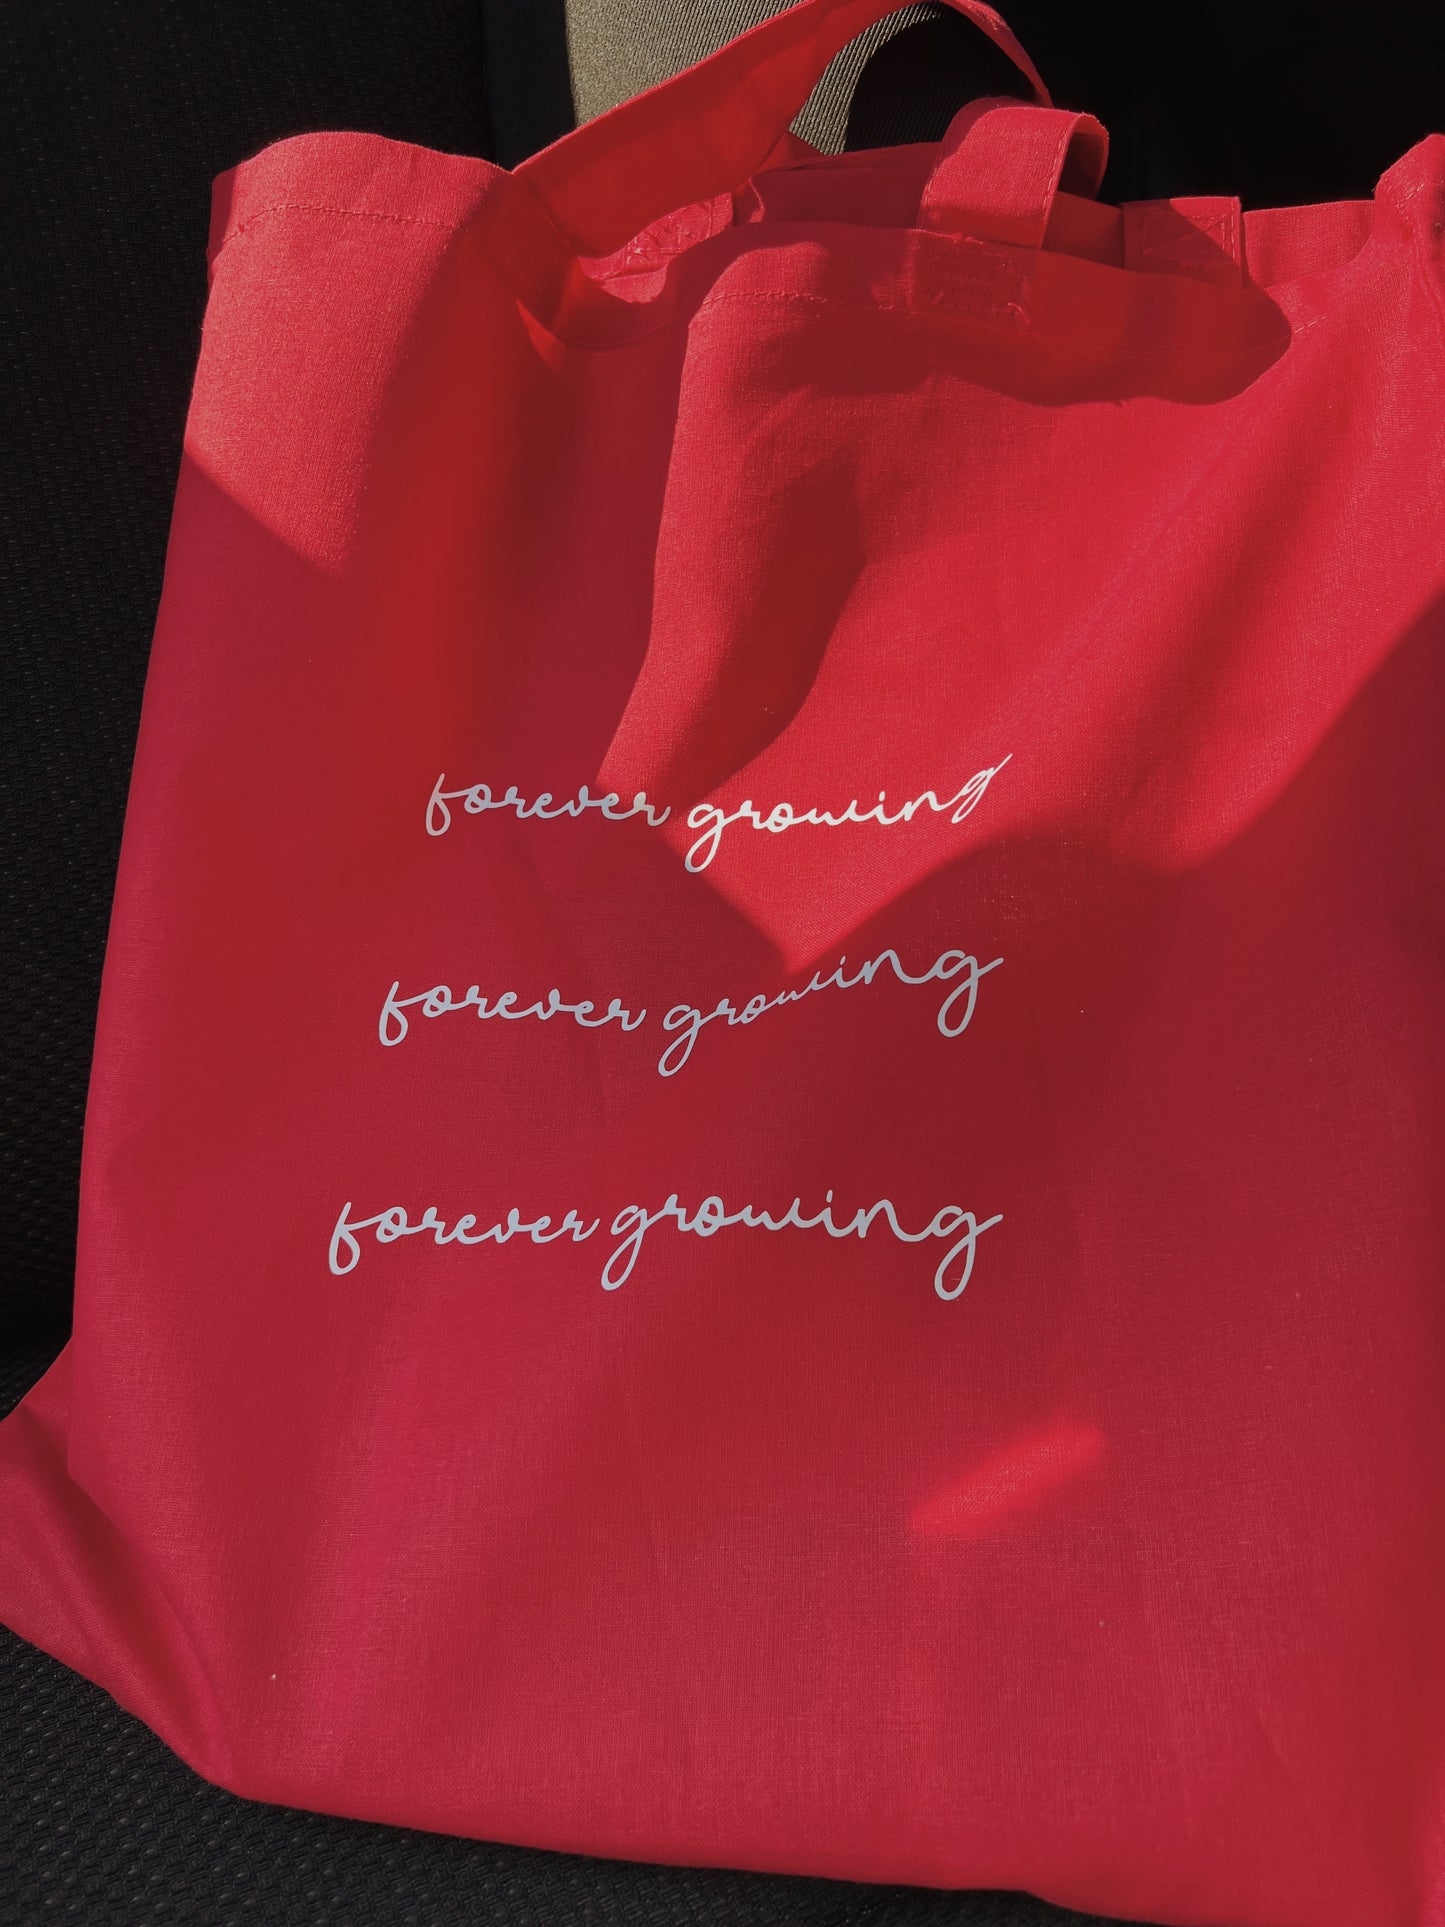 red tote bag with white text on car chair